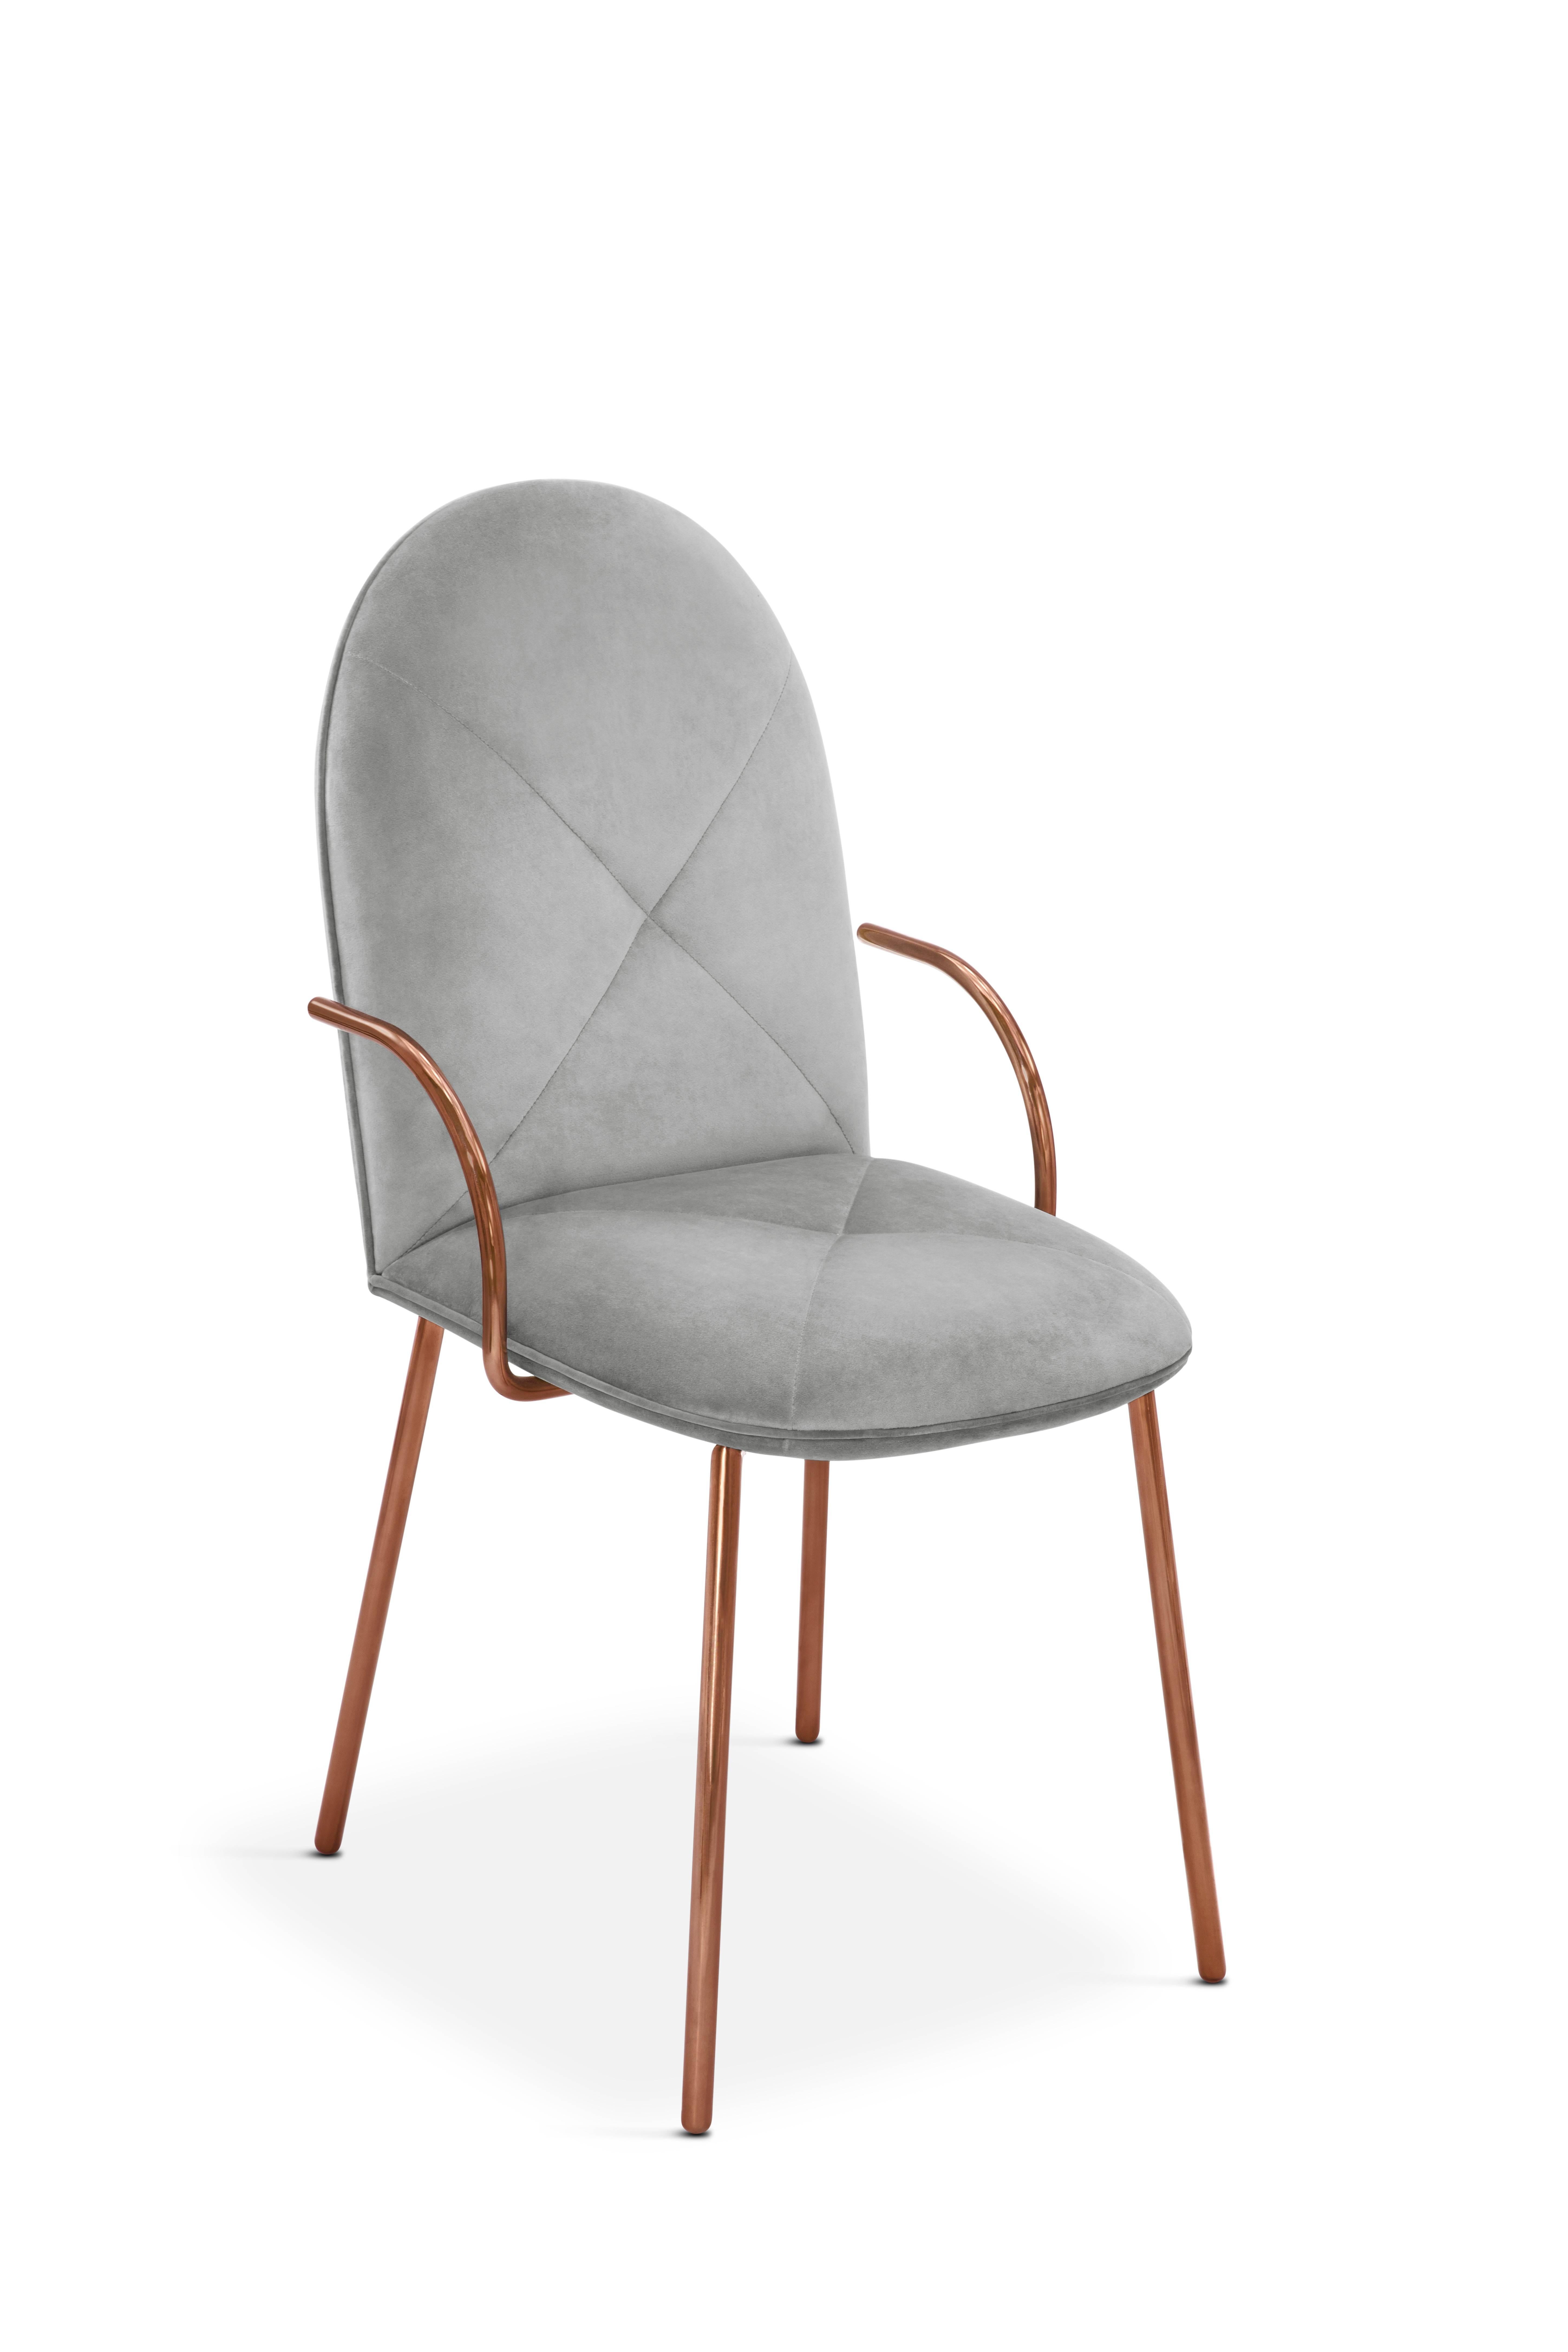 Indian Orion Chair Grey by Nika Zupanc for Scarlet Splendour For Sale